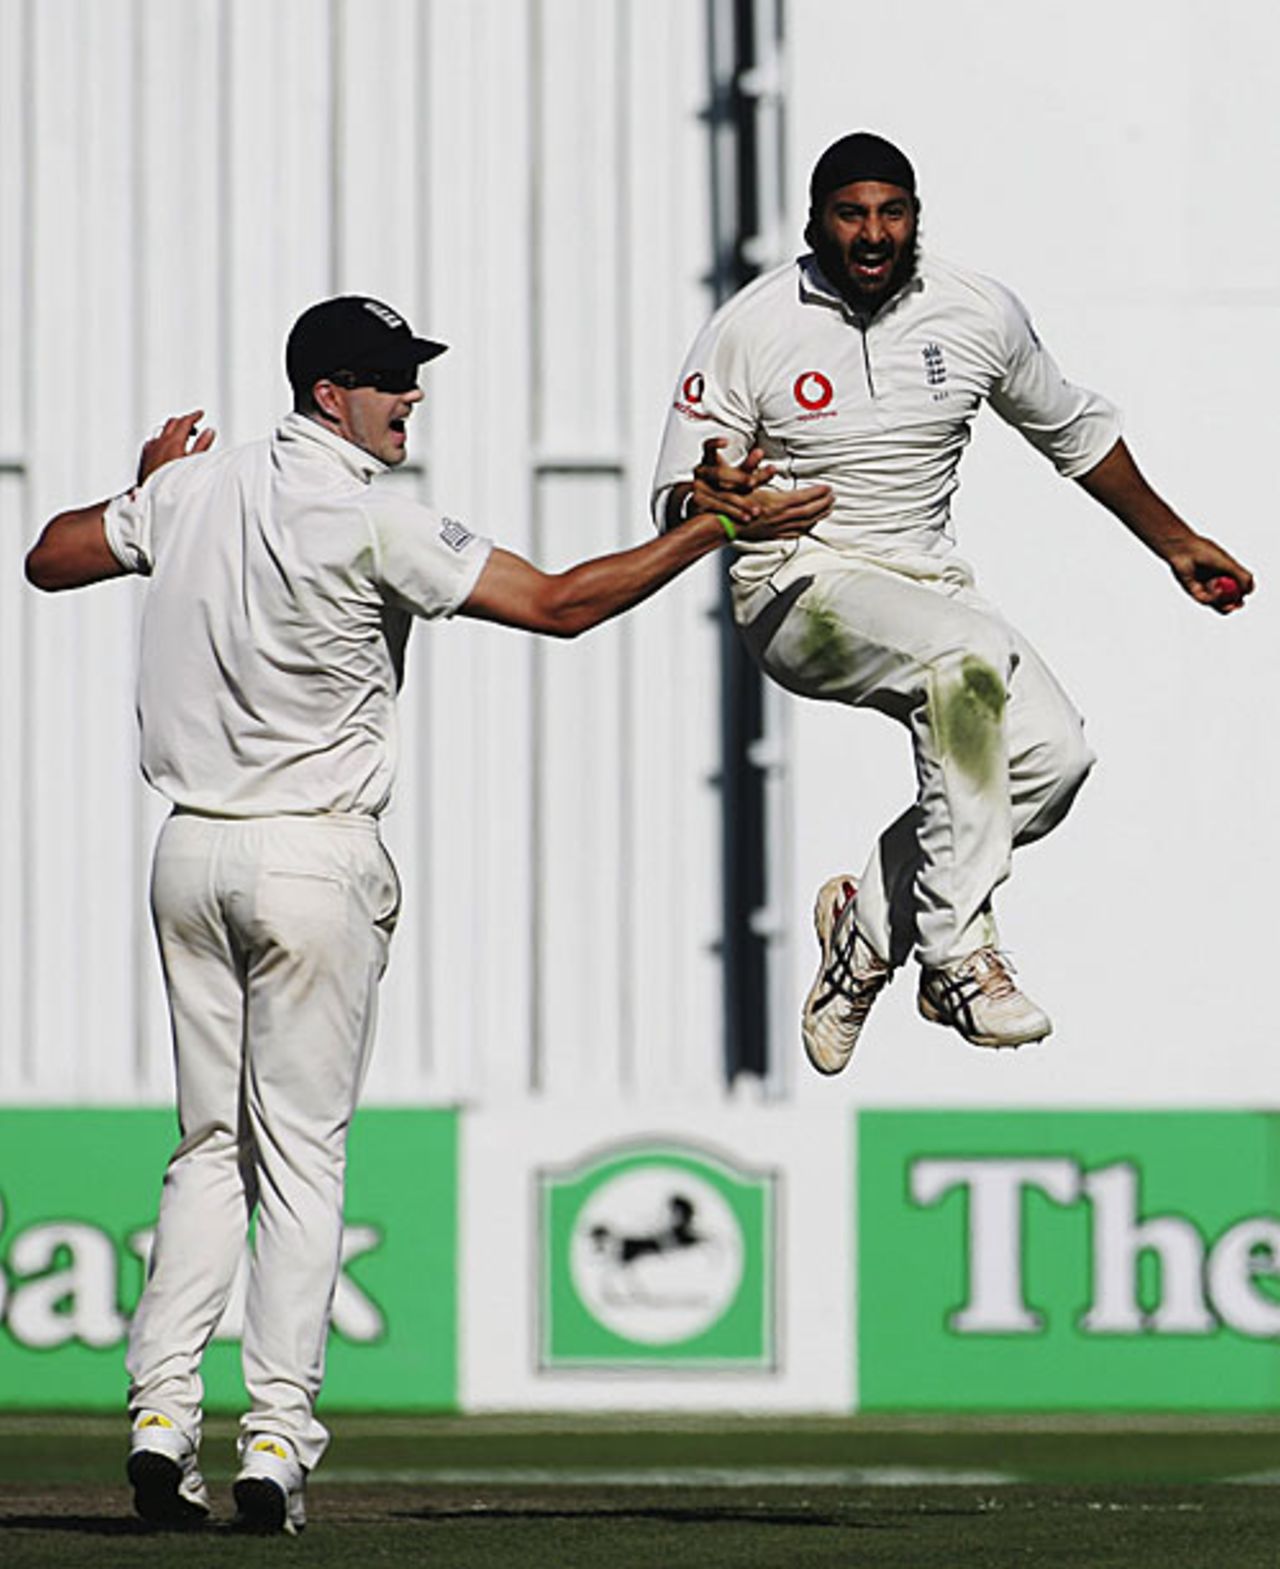 The flying Monty is back: Monty Panesar leaps up in characteristic exuberance after dismissing Brendon McCullum for a duck , New Zealand v England, 1st Test, Hamilton, March 8, 2008